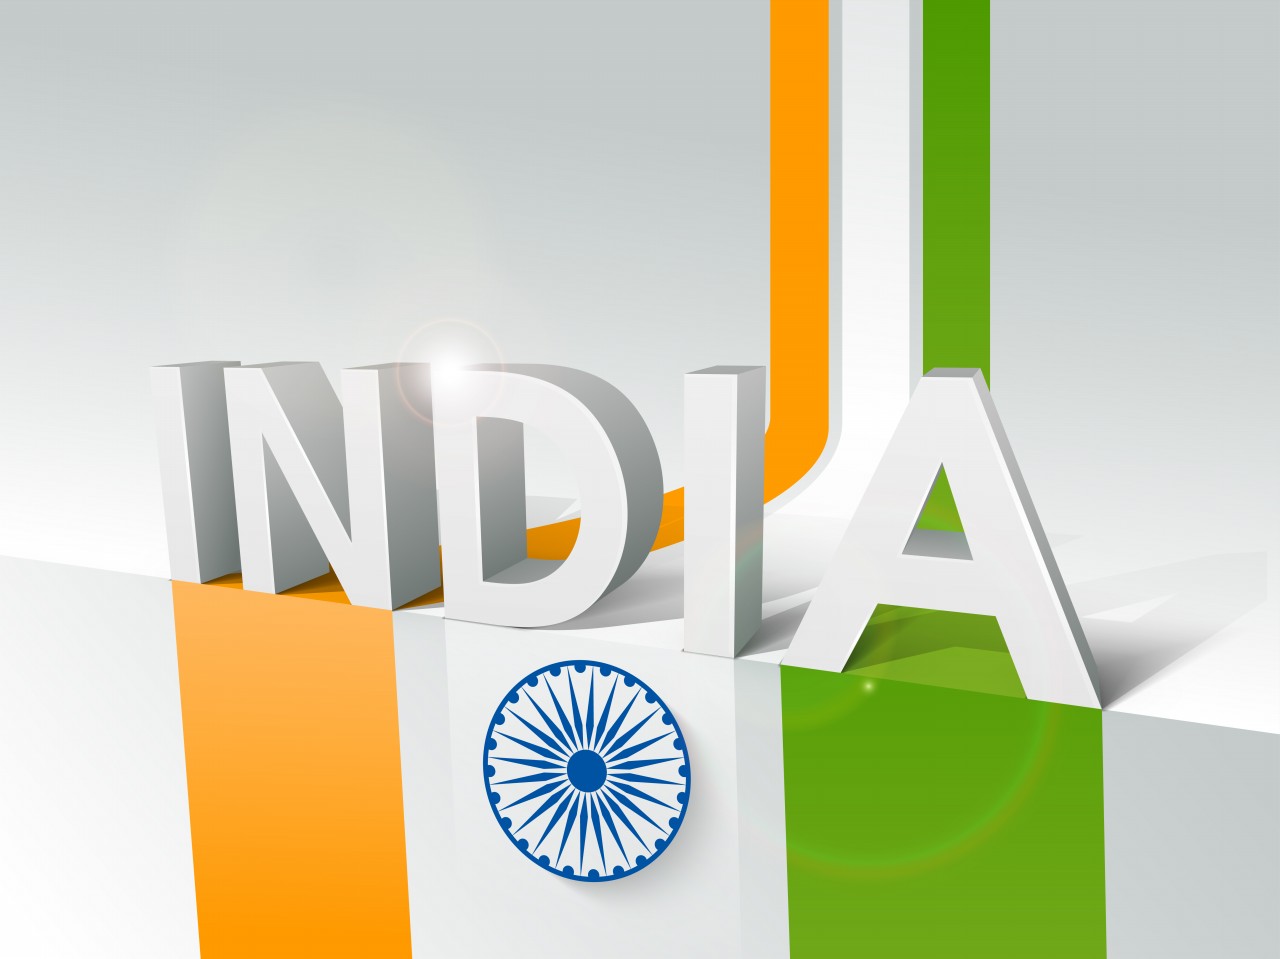 Happy Indian Republic Day - India Name Image Hd , HD Wallpaper & Backgrounds